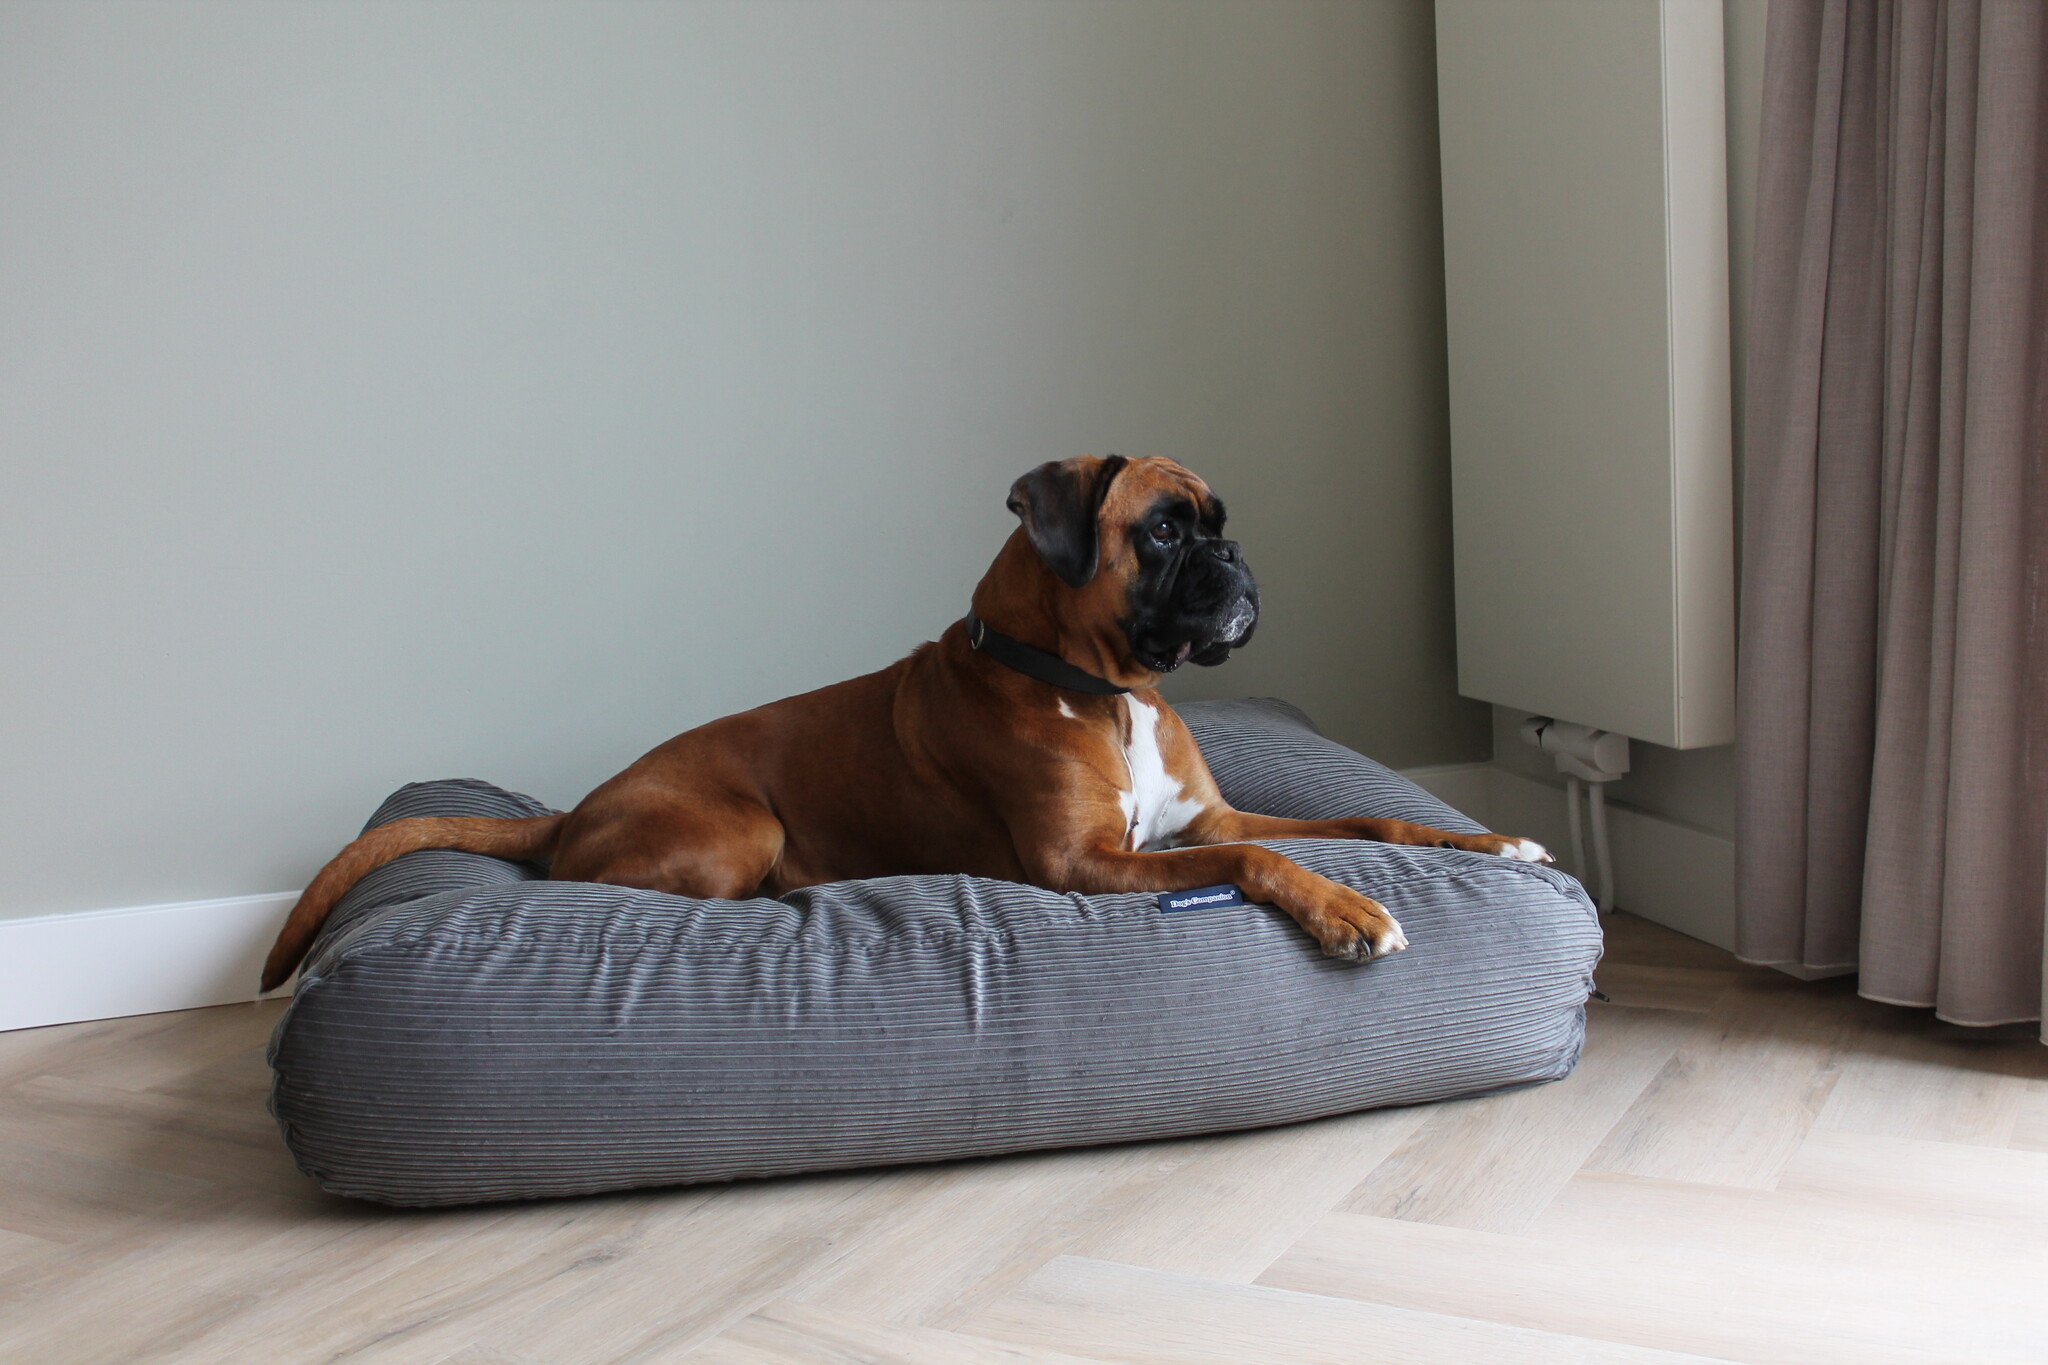 Hondenbed.nl Dog's Companion Hondenbed muisgrijs double ribcord